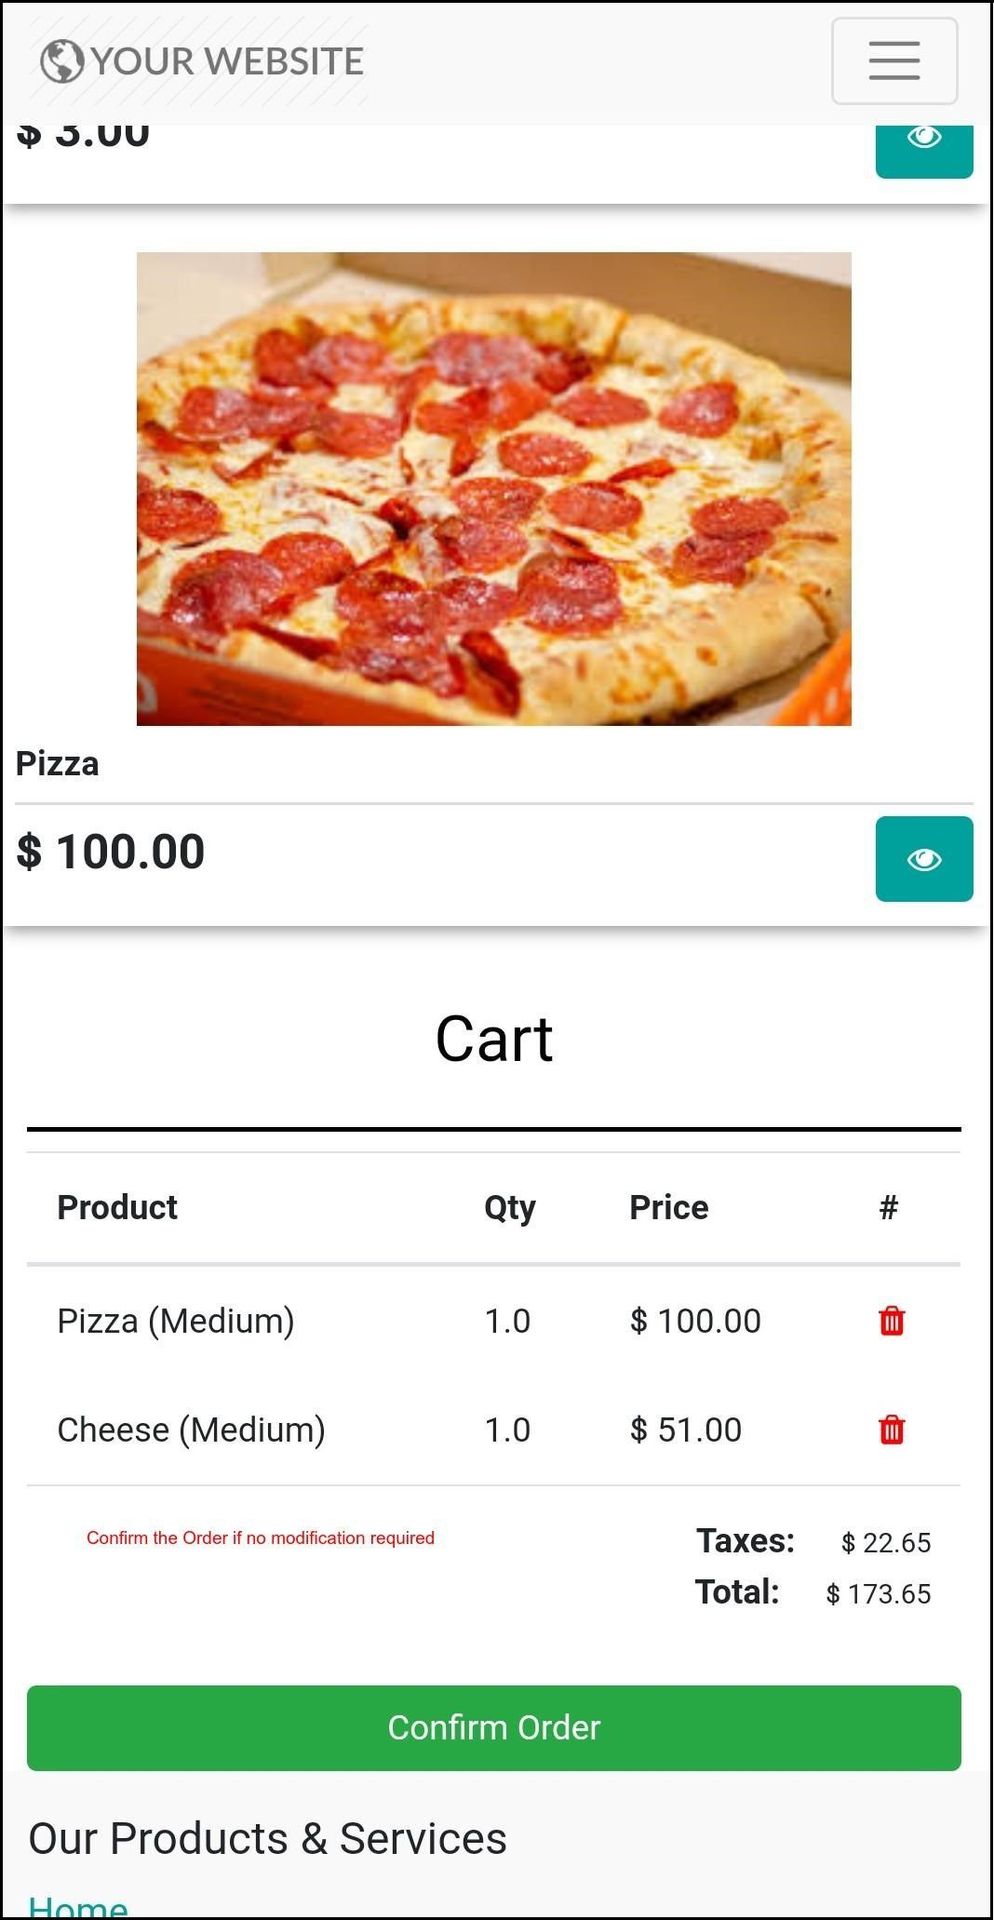 Example: Let us Add Pizza to the Order and add modifier